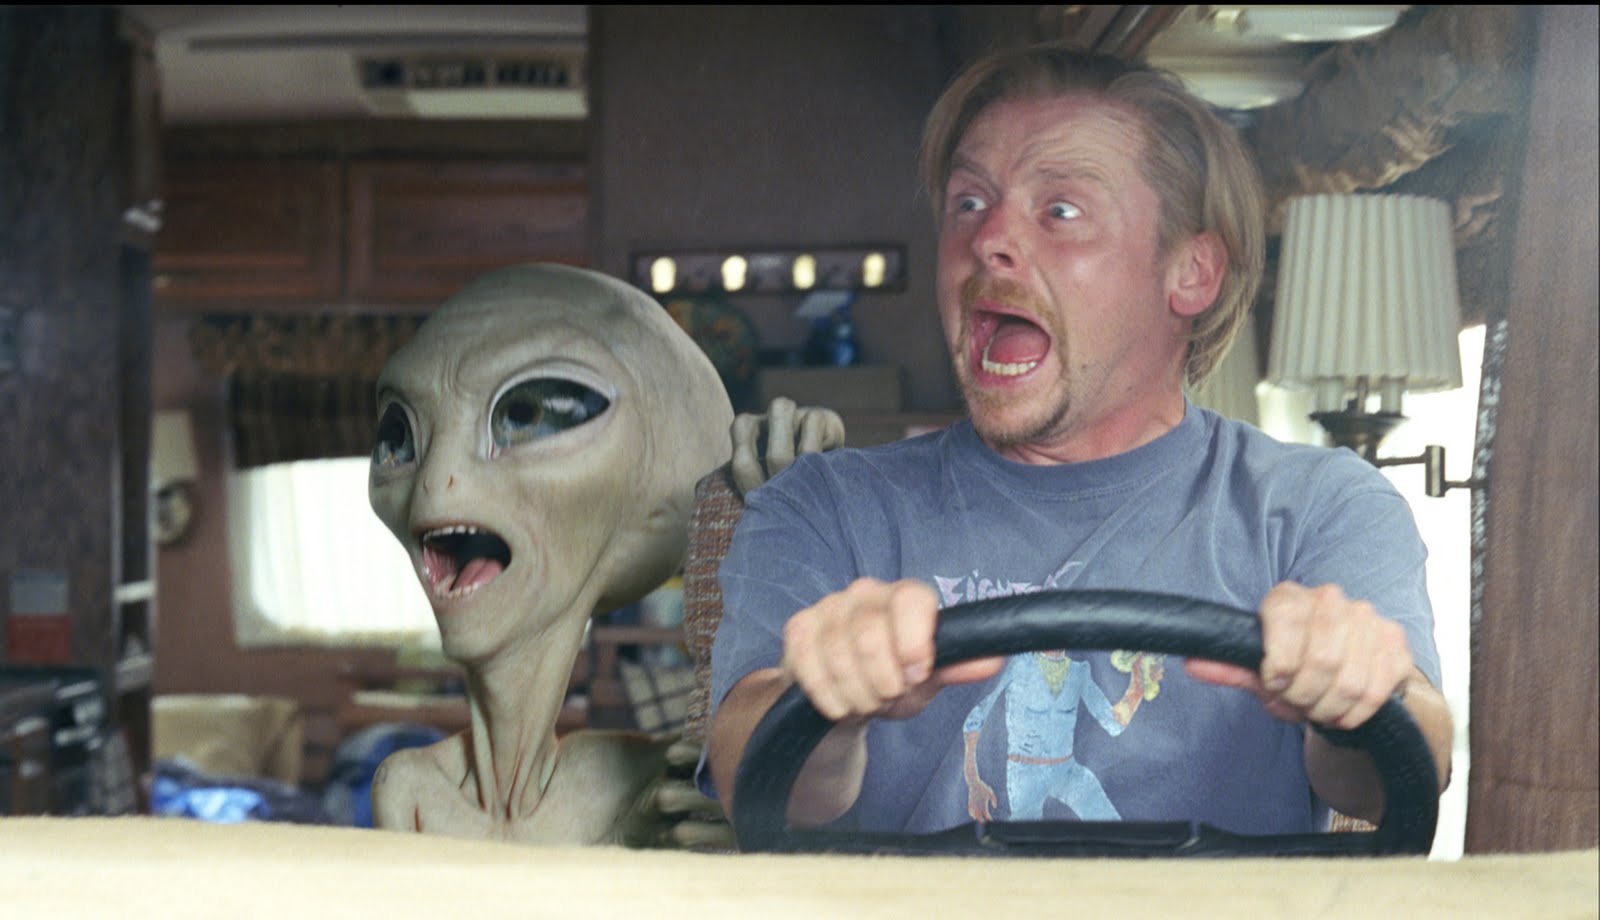 15 Most Funny Alien Pictures